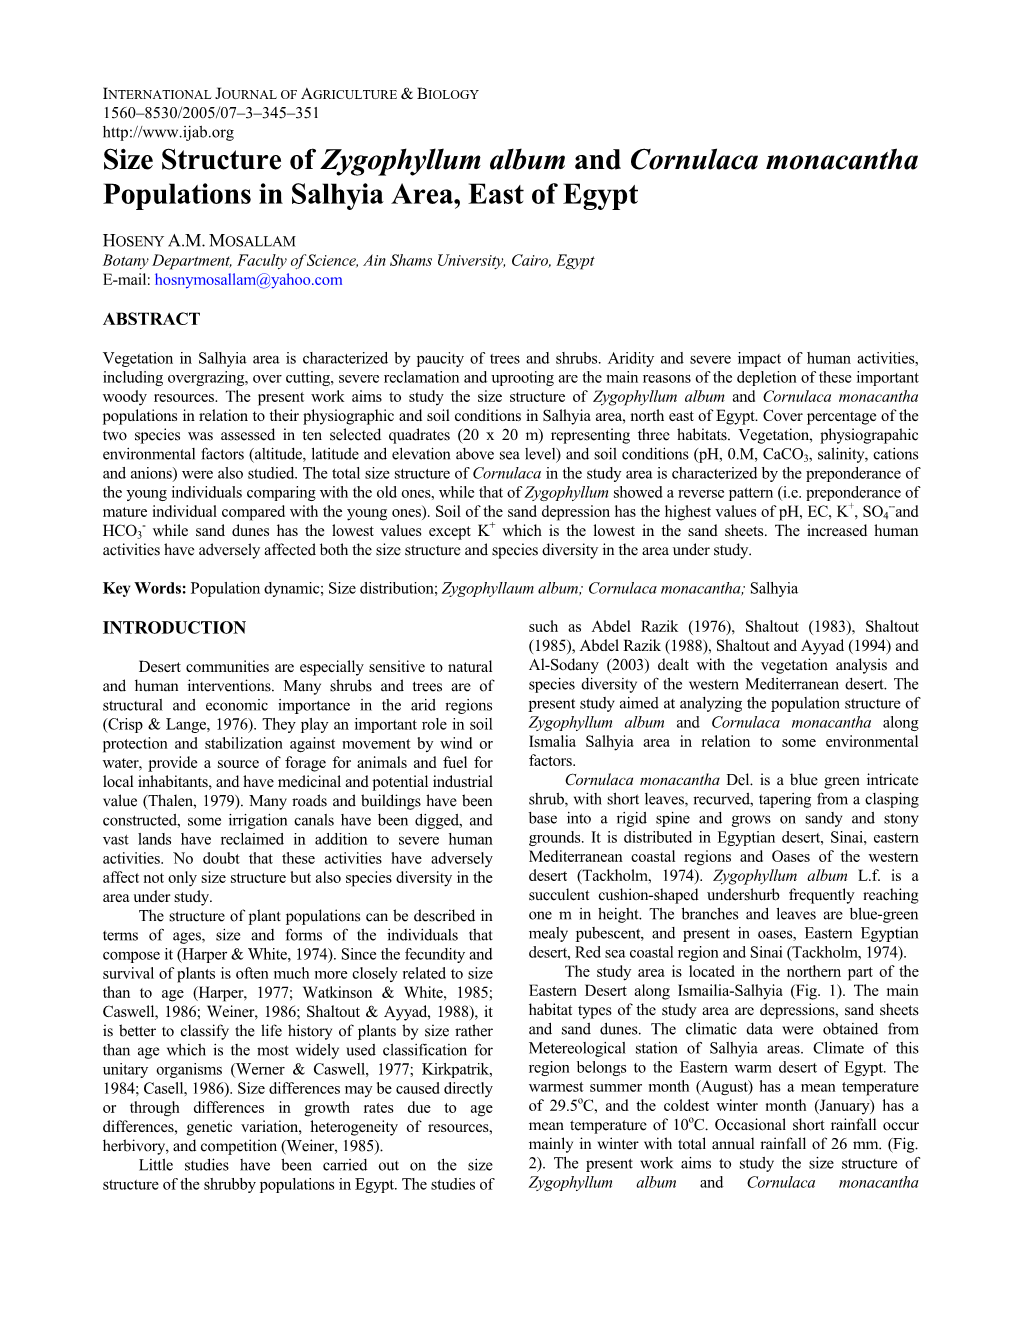 Size Structure of Zygophyllum Album and Cornulaca Monacantha Populations in Salhyia Area, East of Egypt